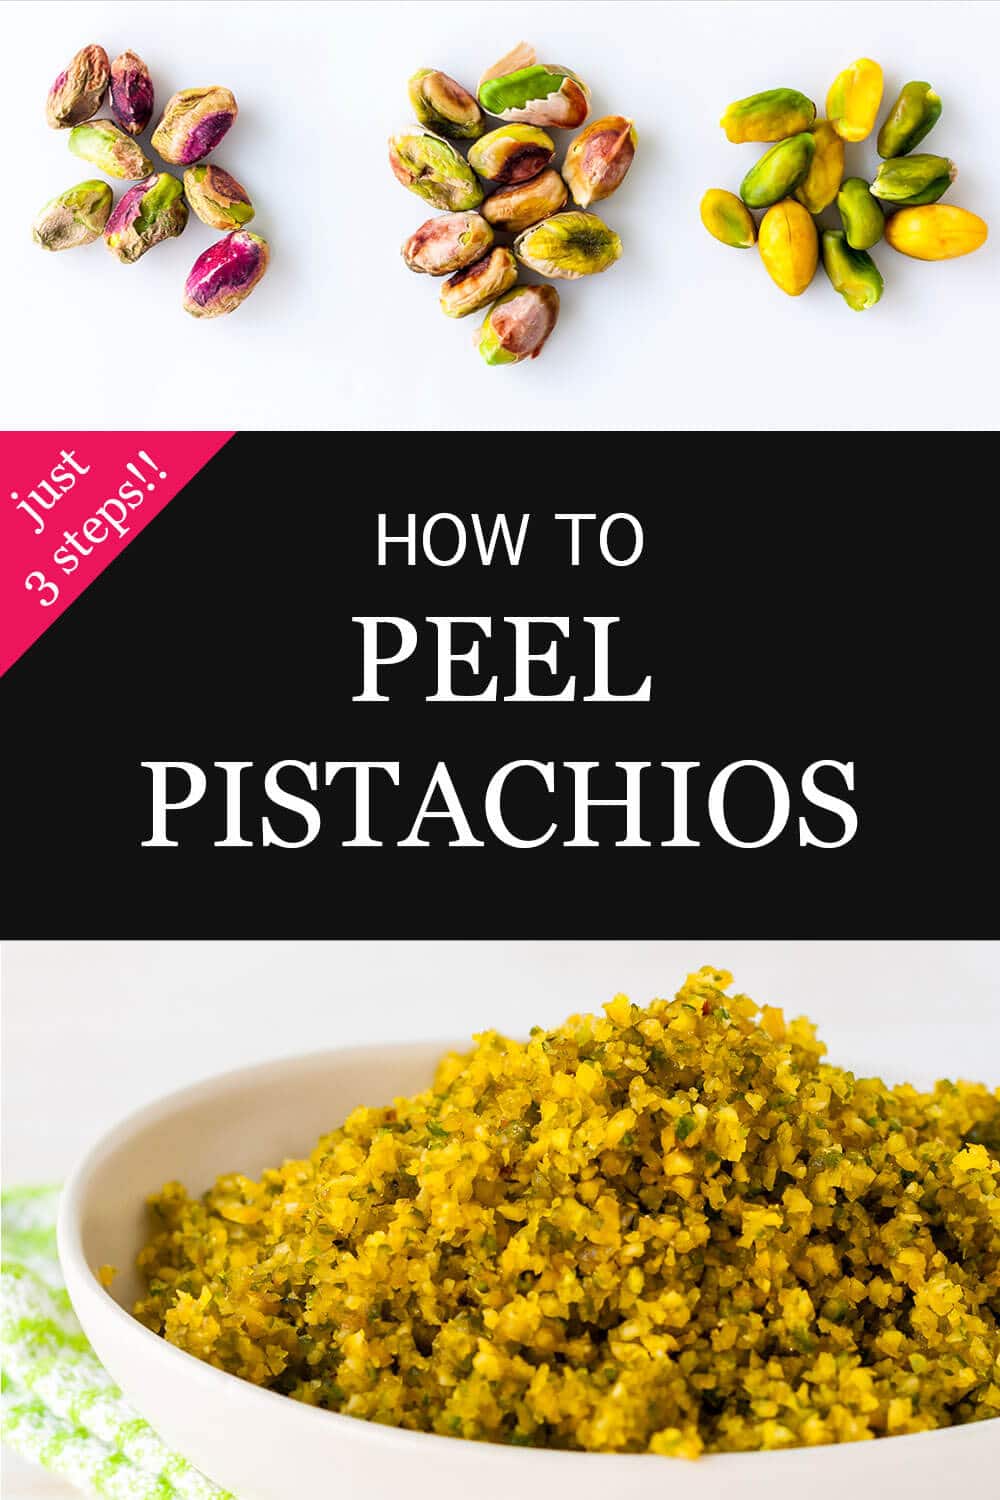 How to peel pistachio nuts to remove skins showing shelled pistachios before boiling, after blanching, then peeled to reveal green pistachio nut